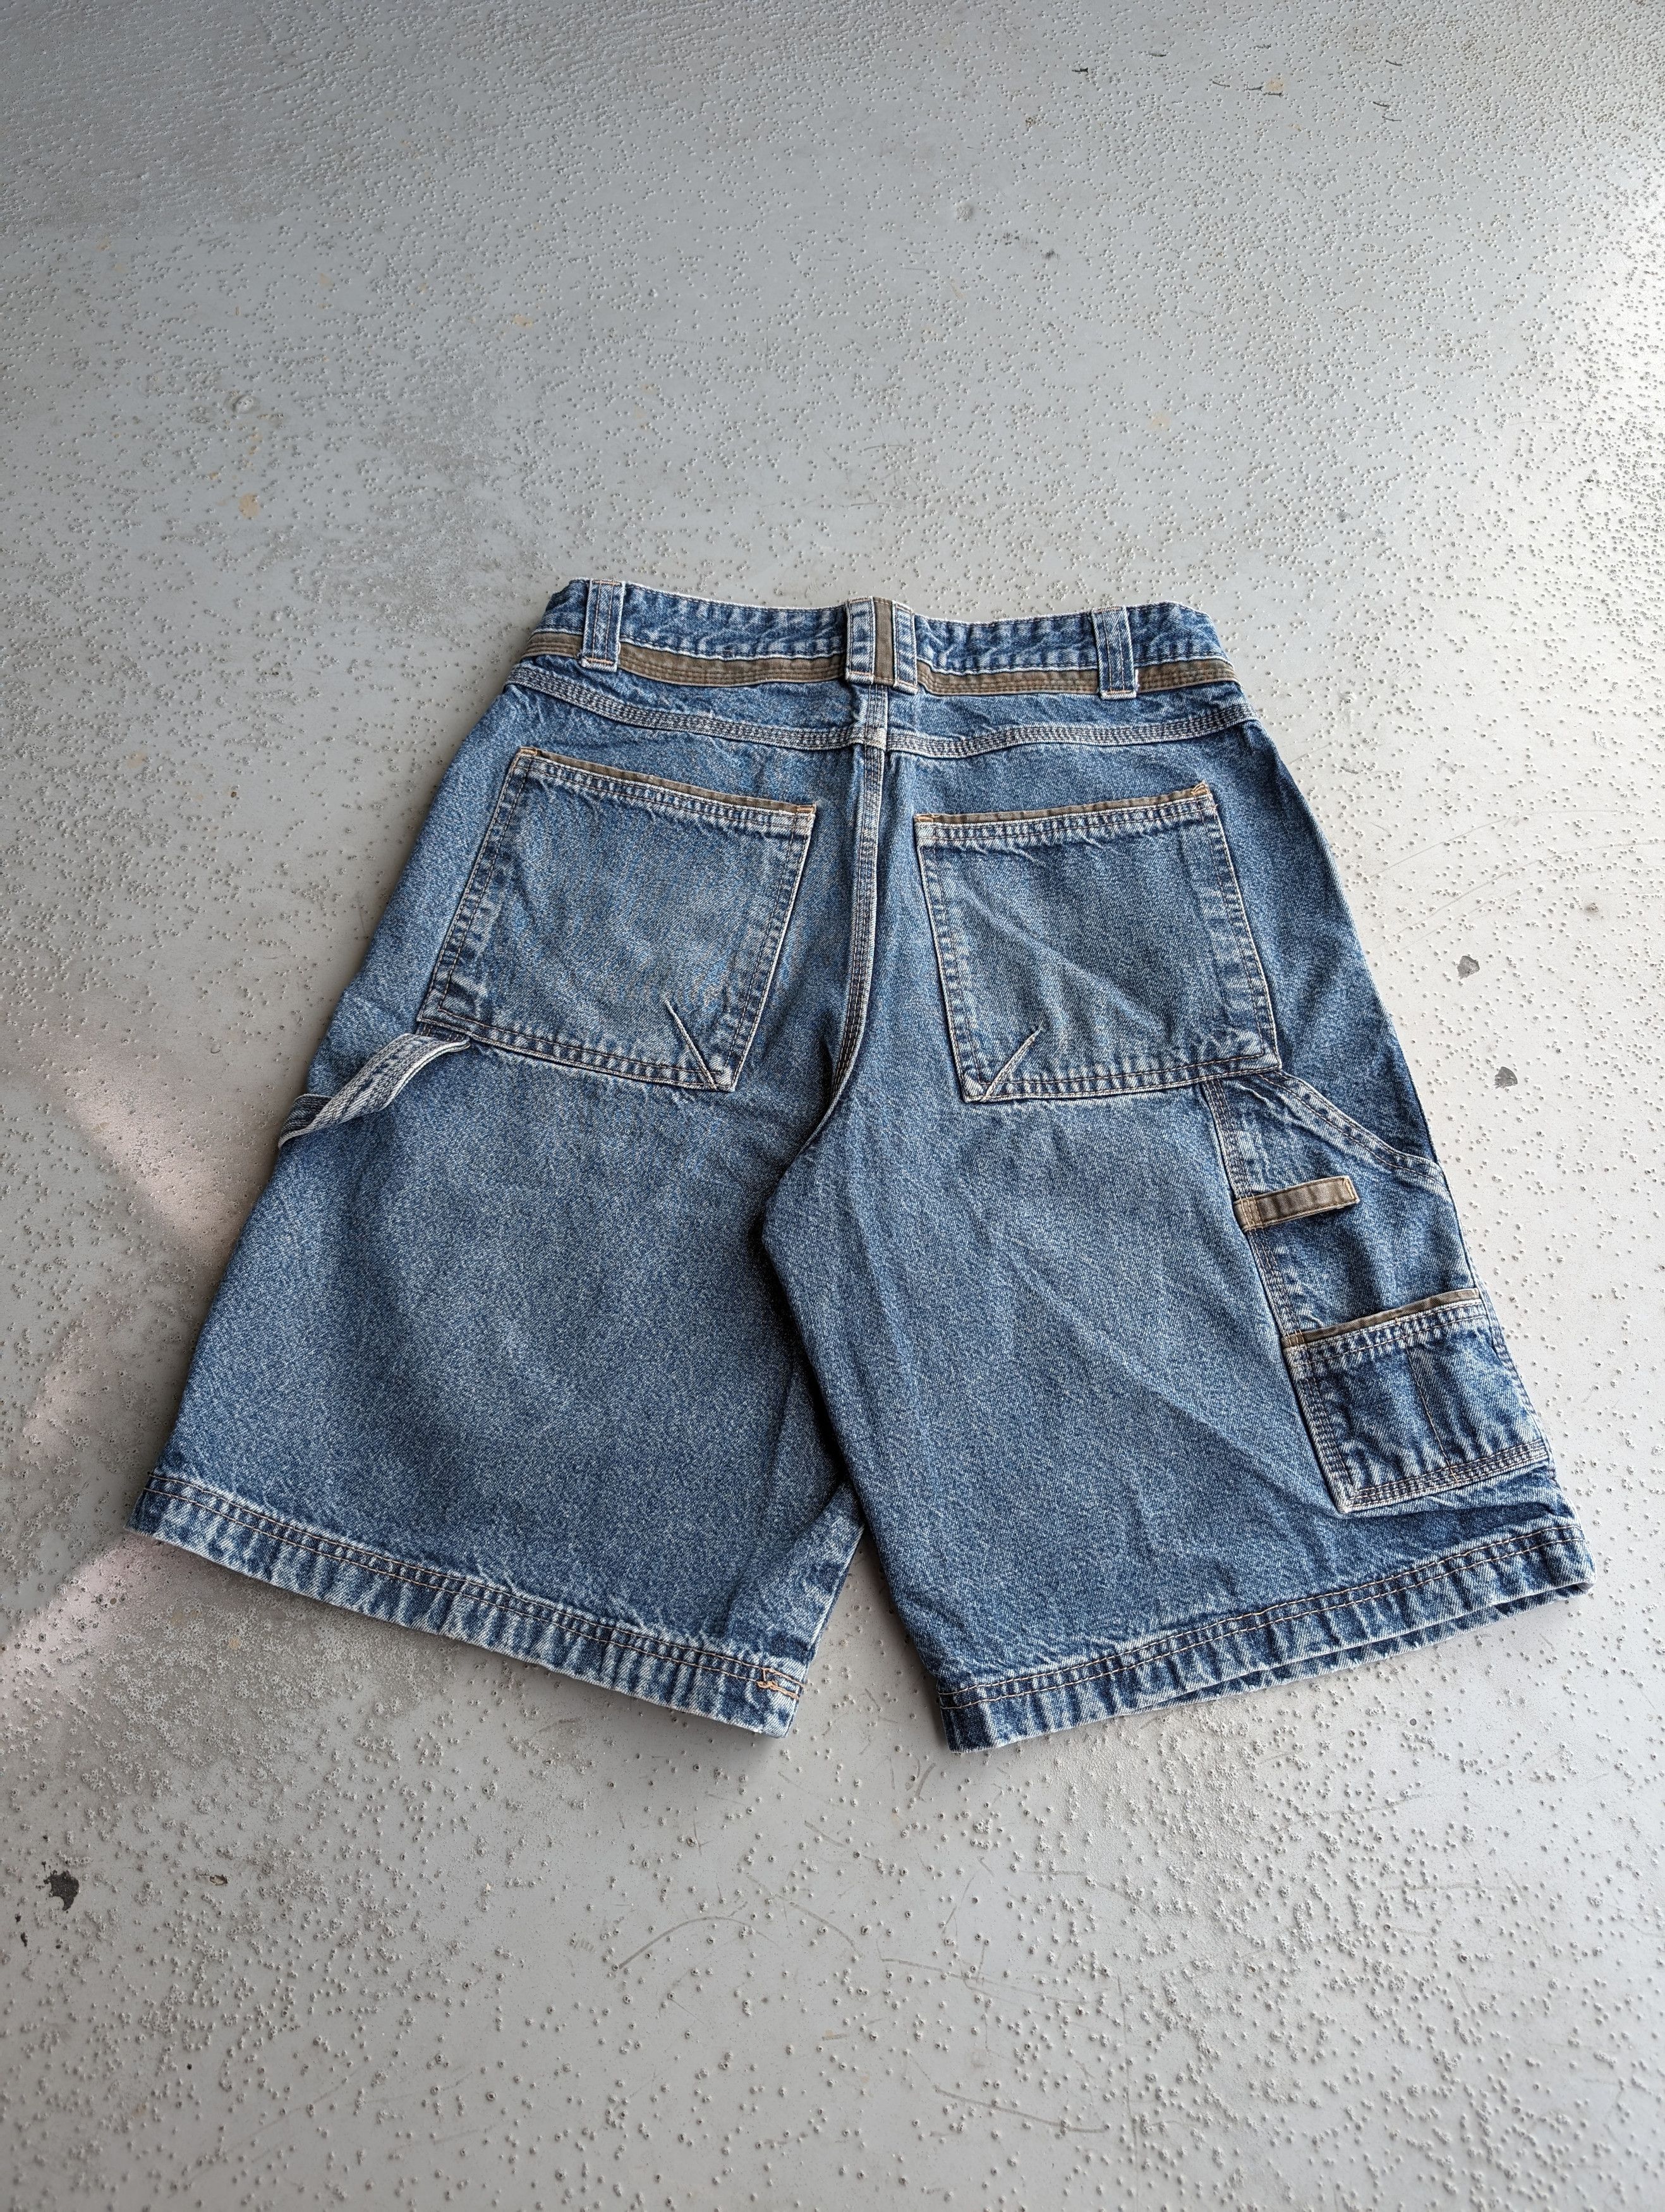 Pre-owned Faded Glory X Jnco Crazy Y2k Faded Glory Carpenter Jorts Baggy Skater Shorts In Blue